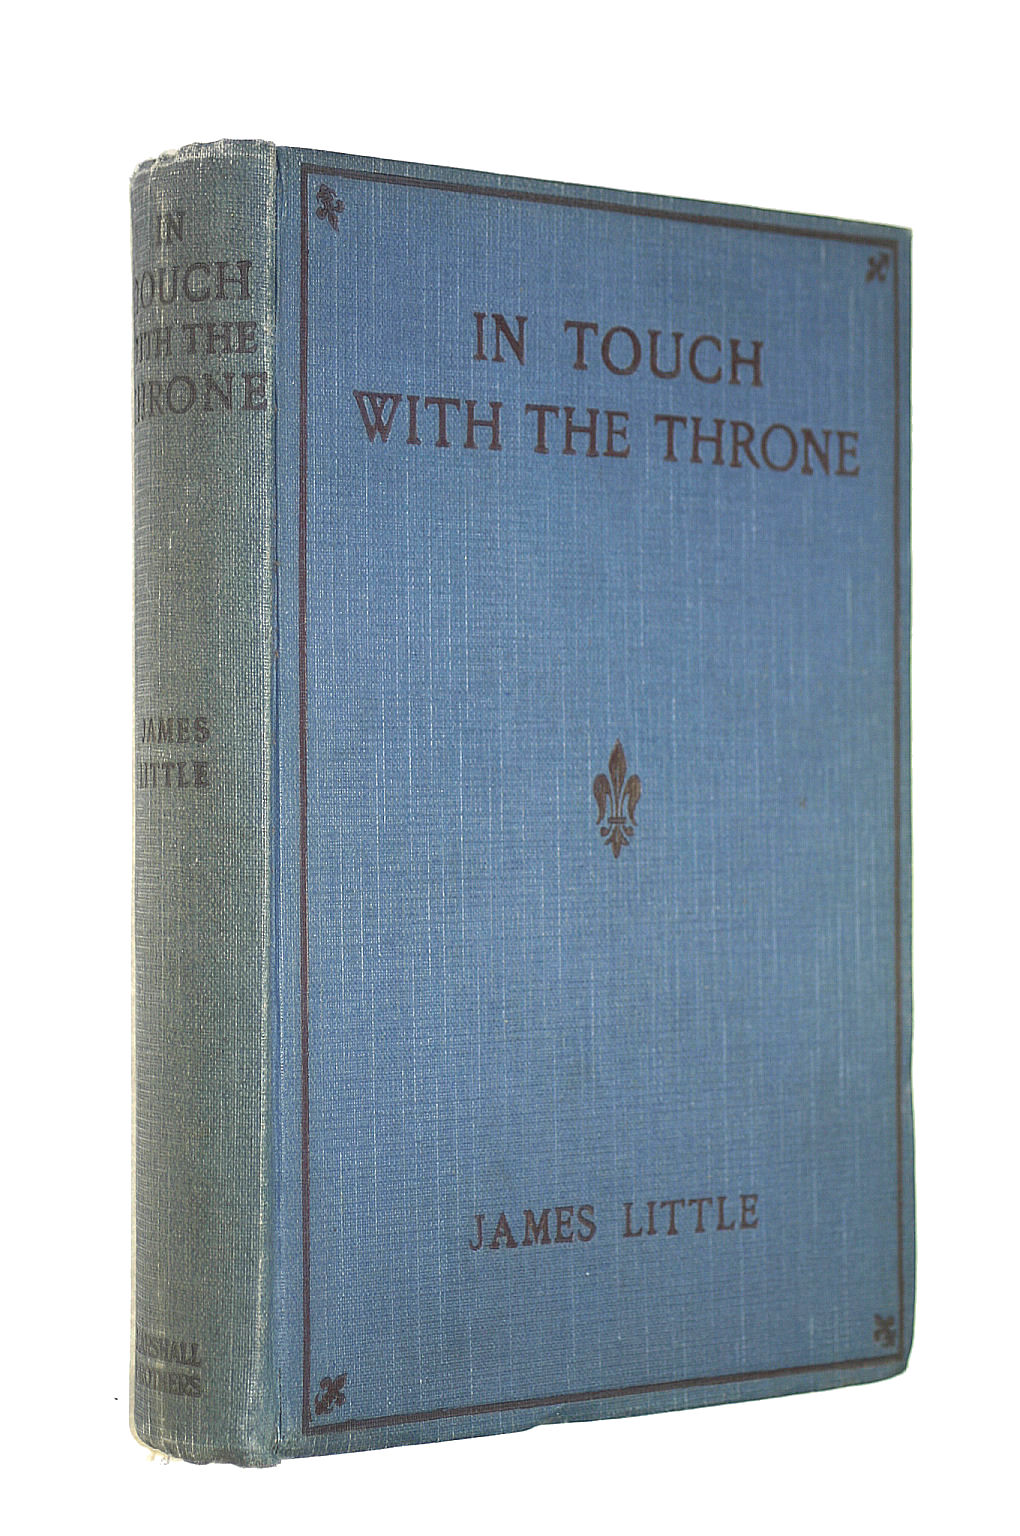 JAMES LITTLE - In Touch with the Throne